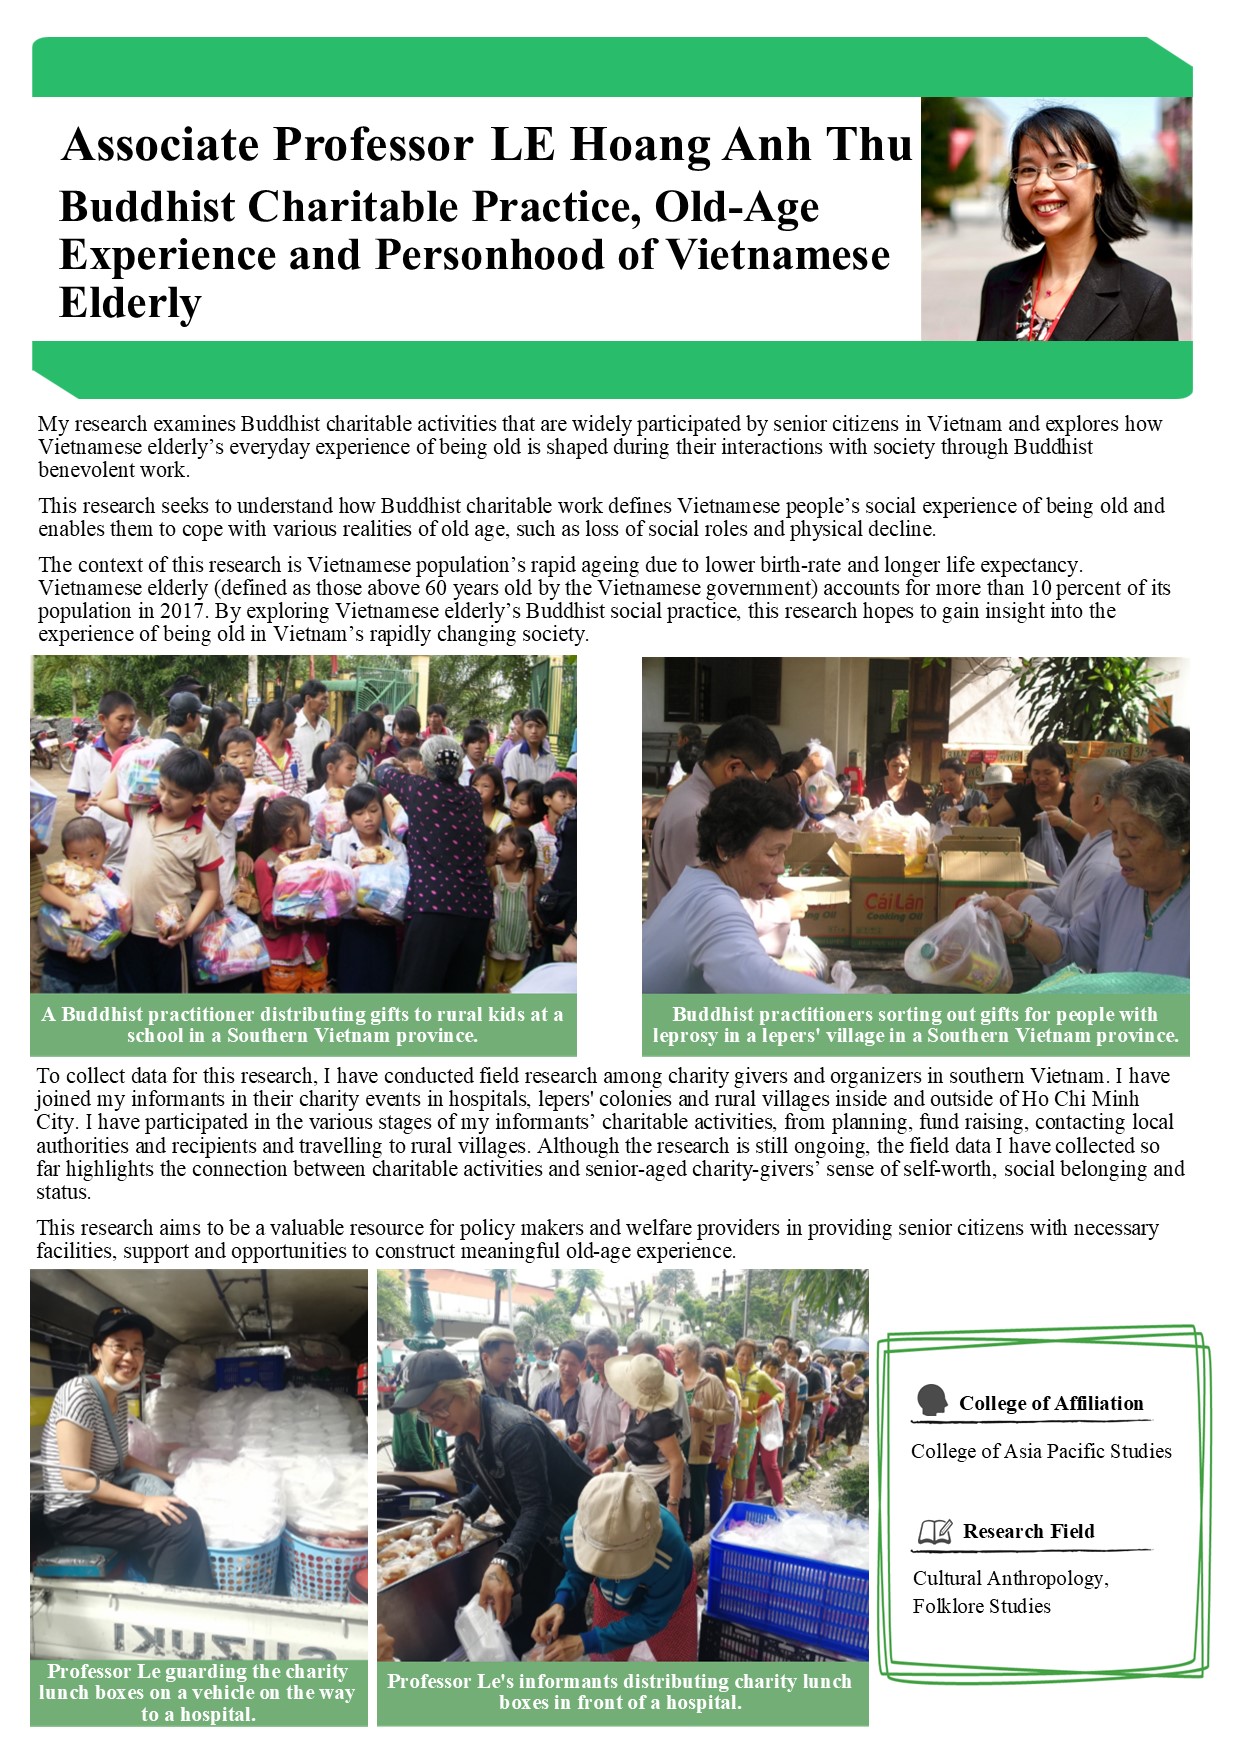 Buddhist Charitable Practice, Old-Age Experience and Personhood of Vietnamese Elderly